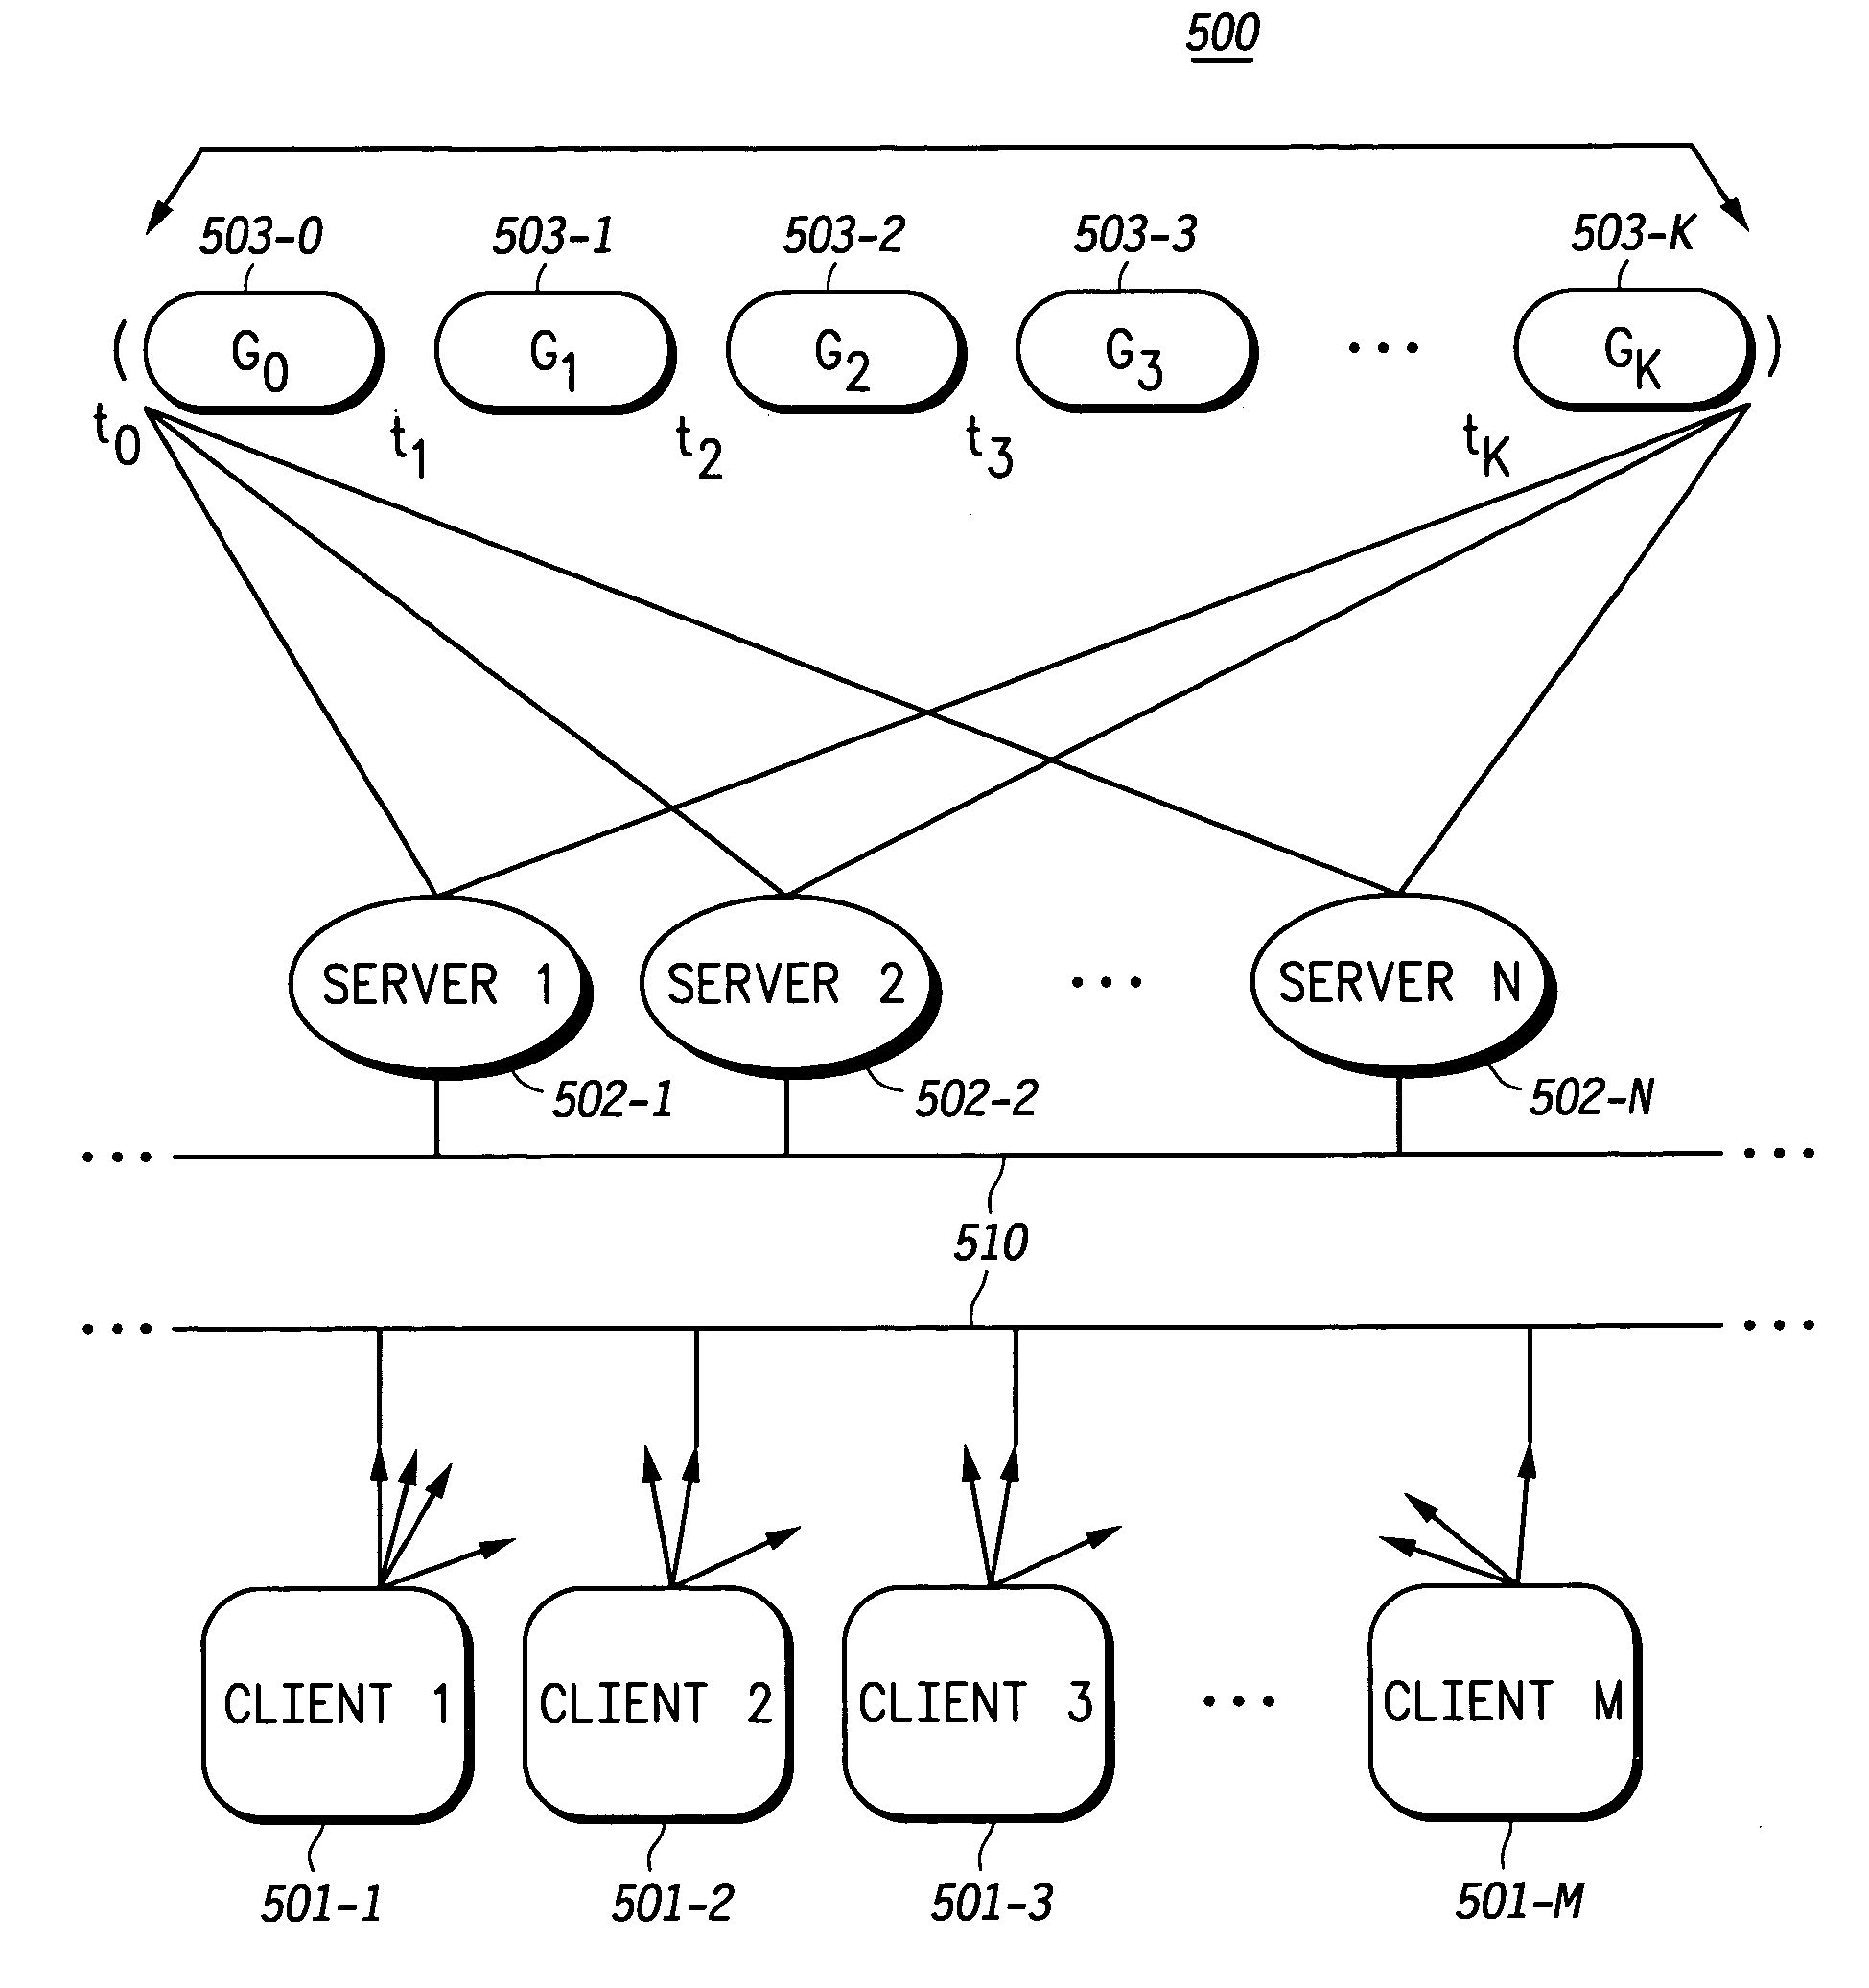 Load balancing method in a communication network